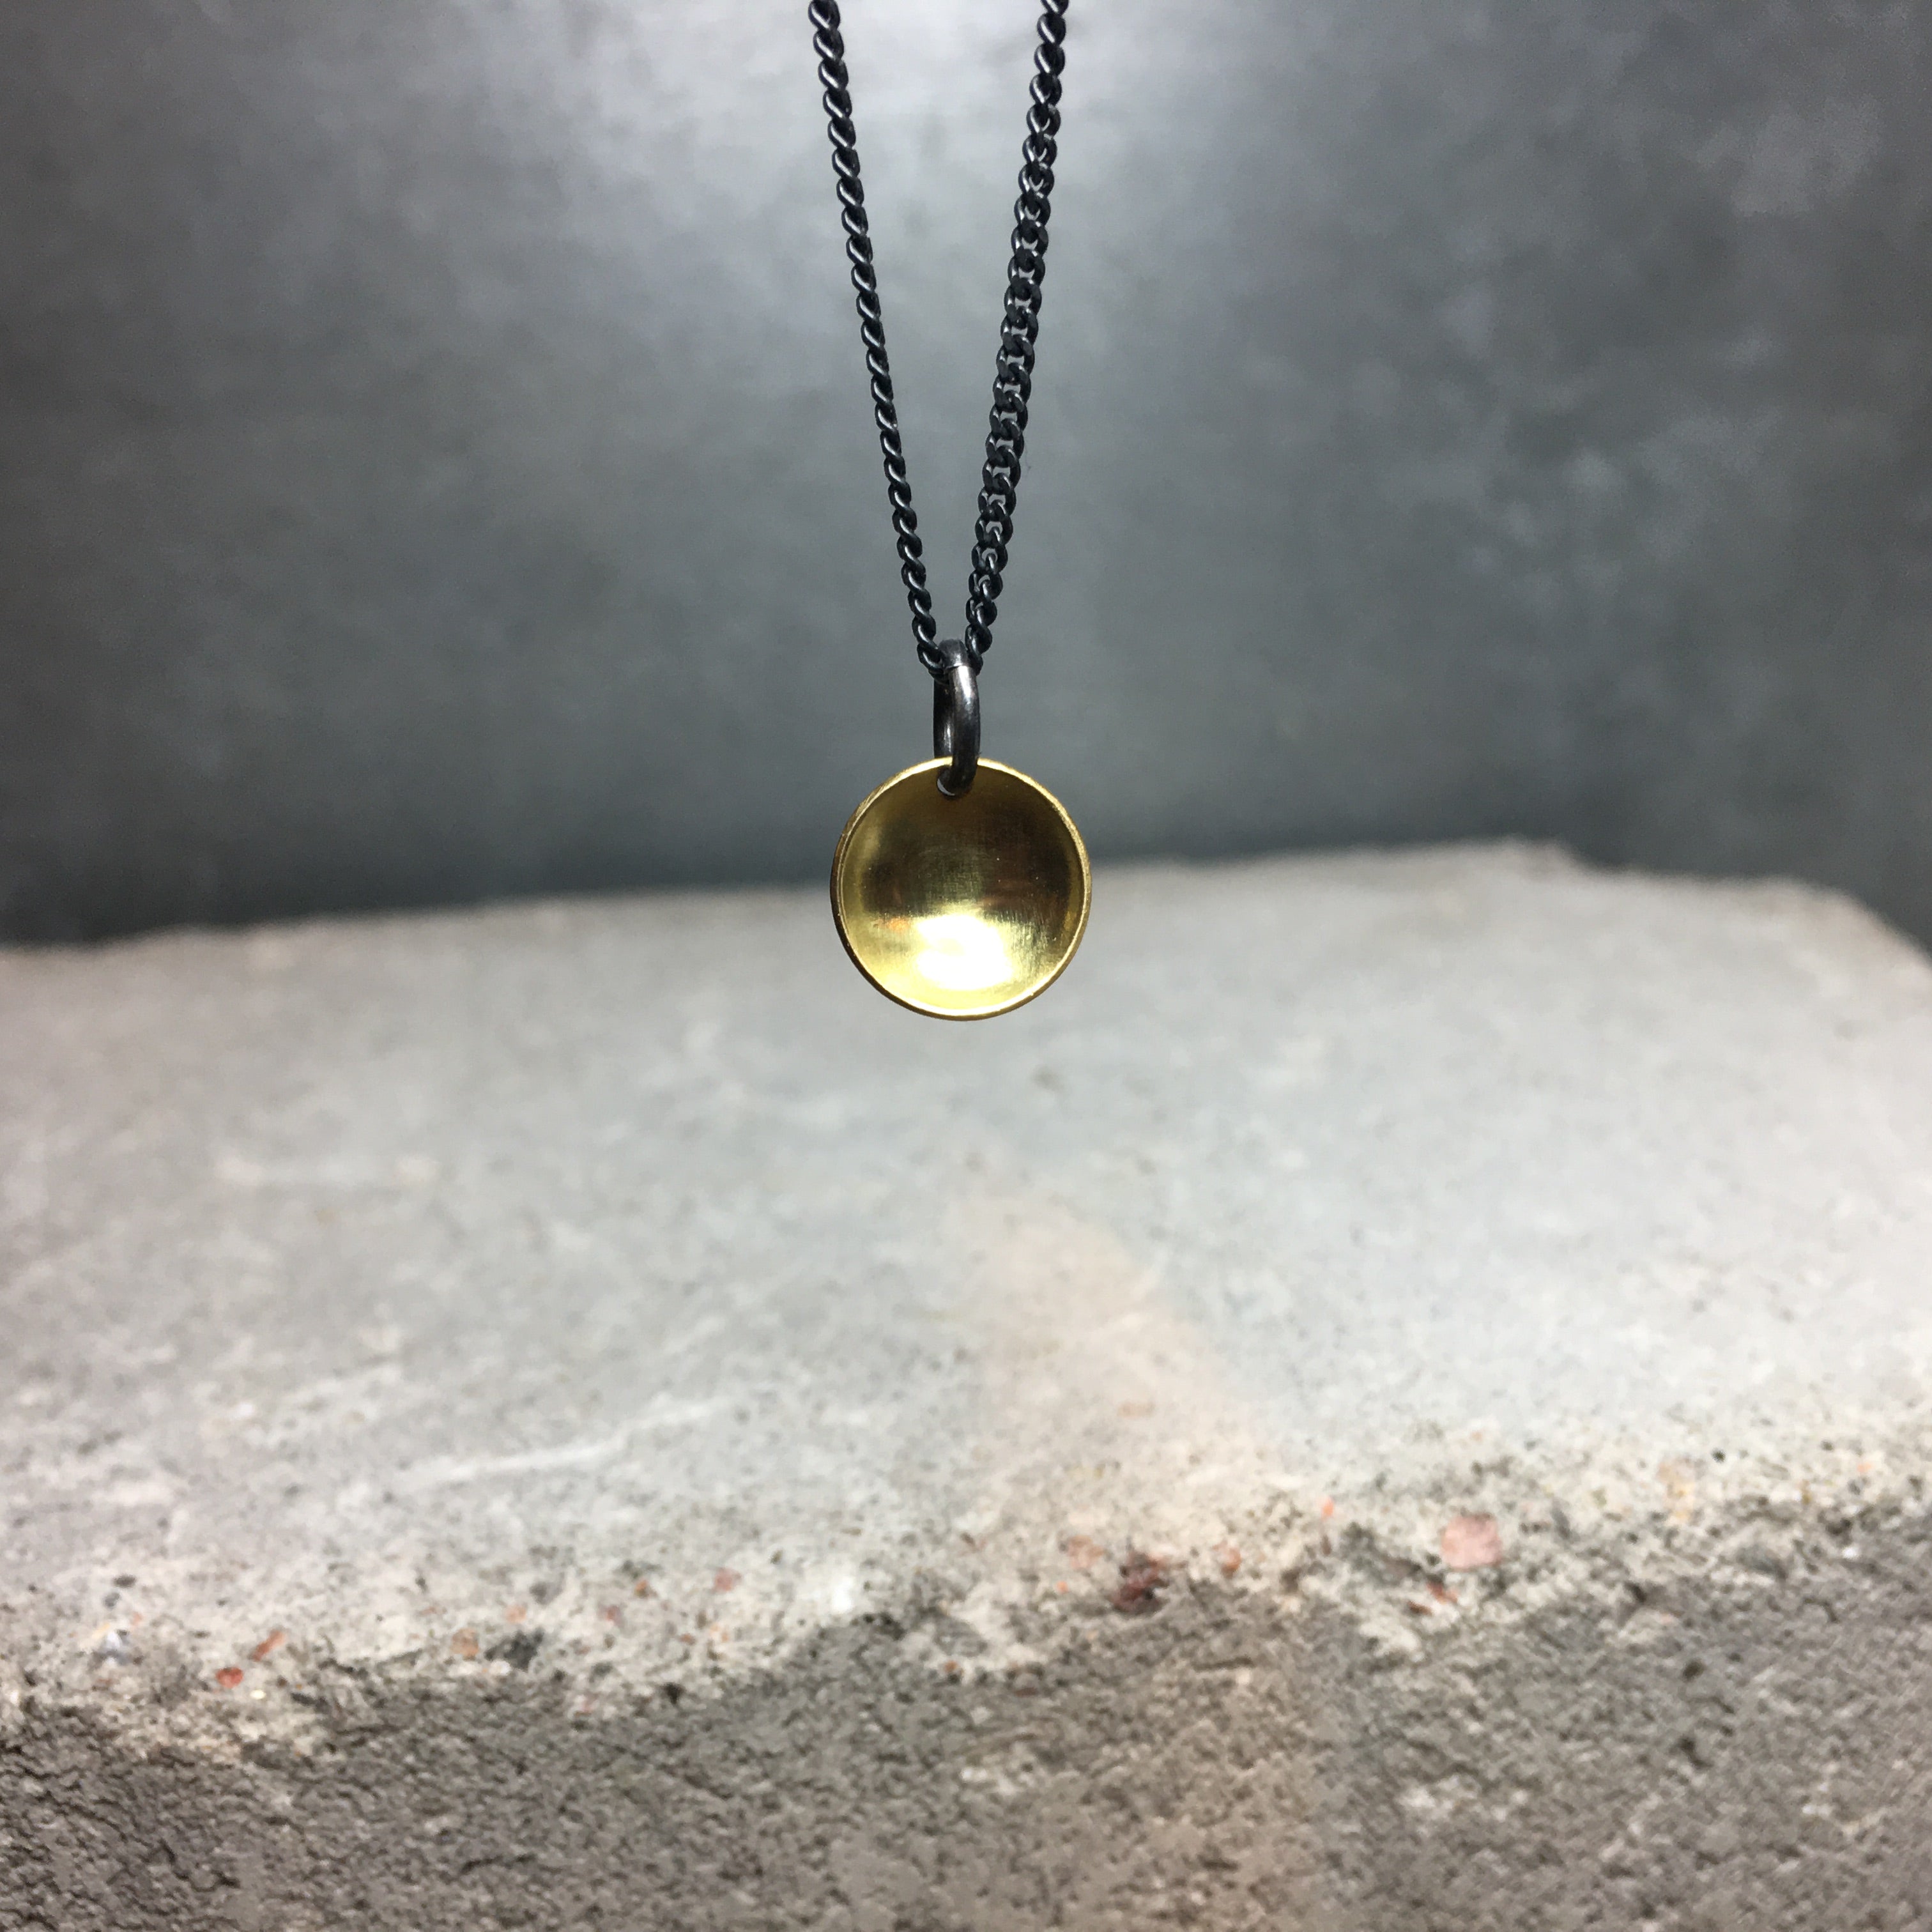 https://wildandarrow.com/cdn/shop/products/Dome_pendant_small_golden_brass_round_necklace_with_dark_silver_chain_made_by_wild-and-arrow_stockholm_sweden.jpg?v=1516464538